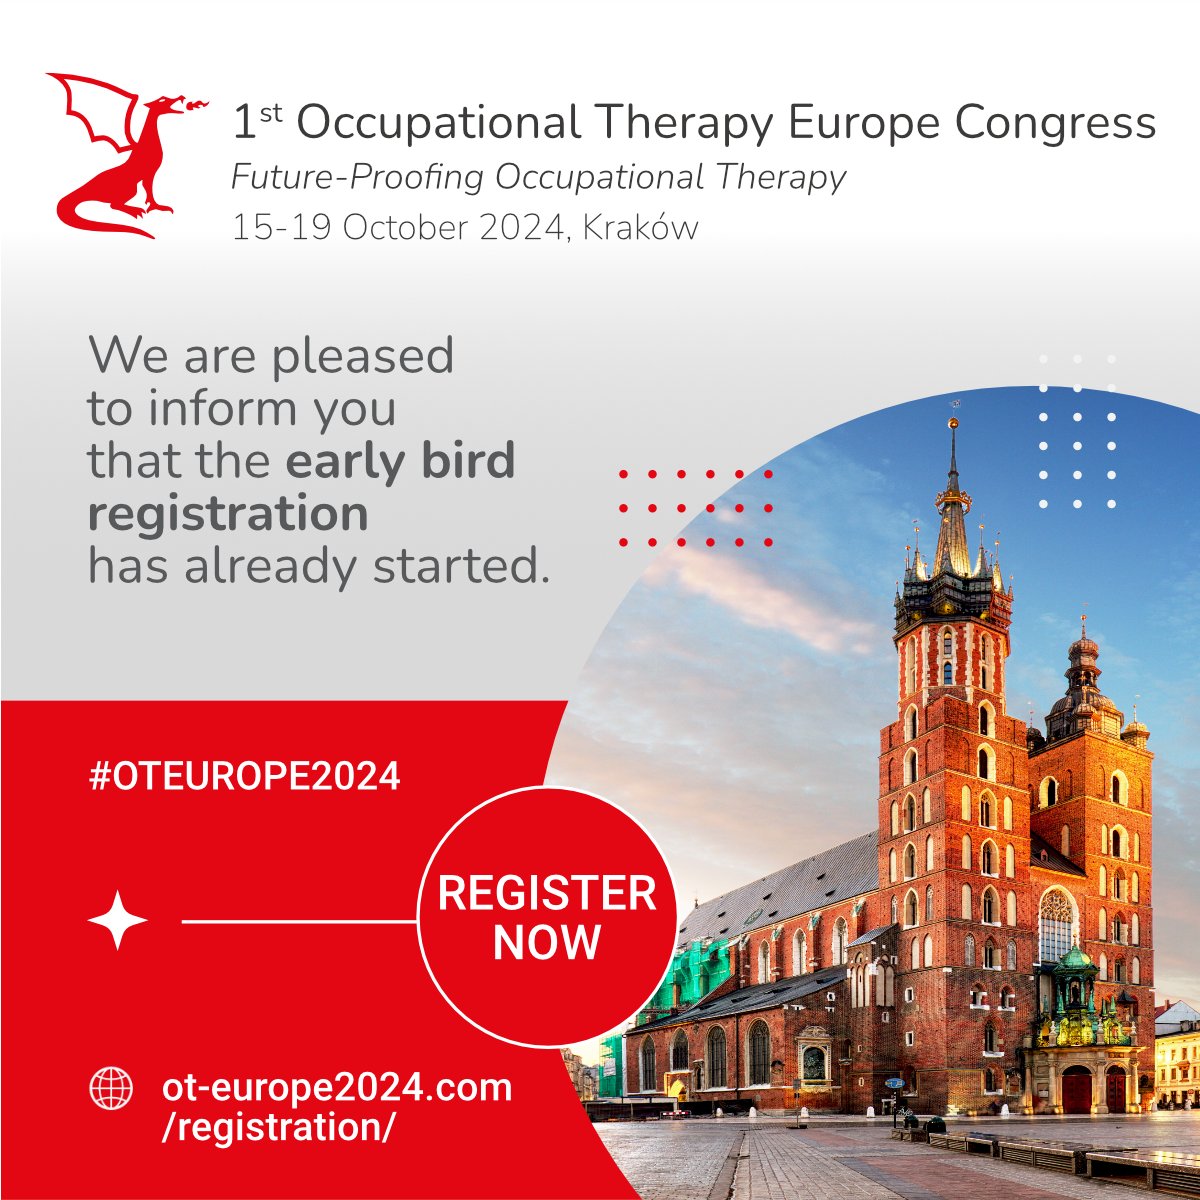 Network with occupational therapists across Europe, join @COTECEurope for their first OT-Europe Congress. Find out more: loom.ly/zxIv2eM #OTEurope2024